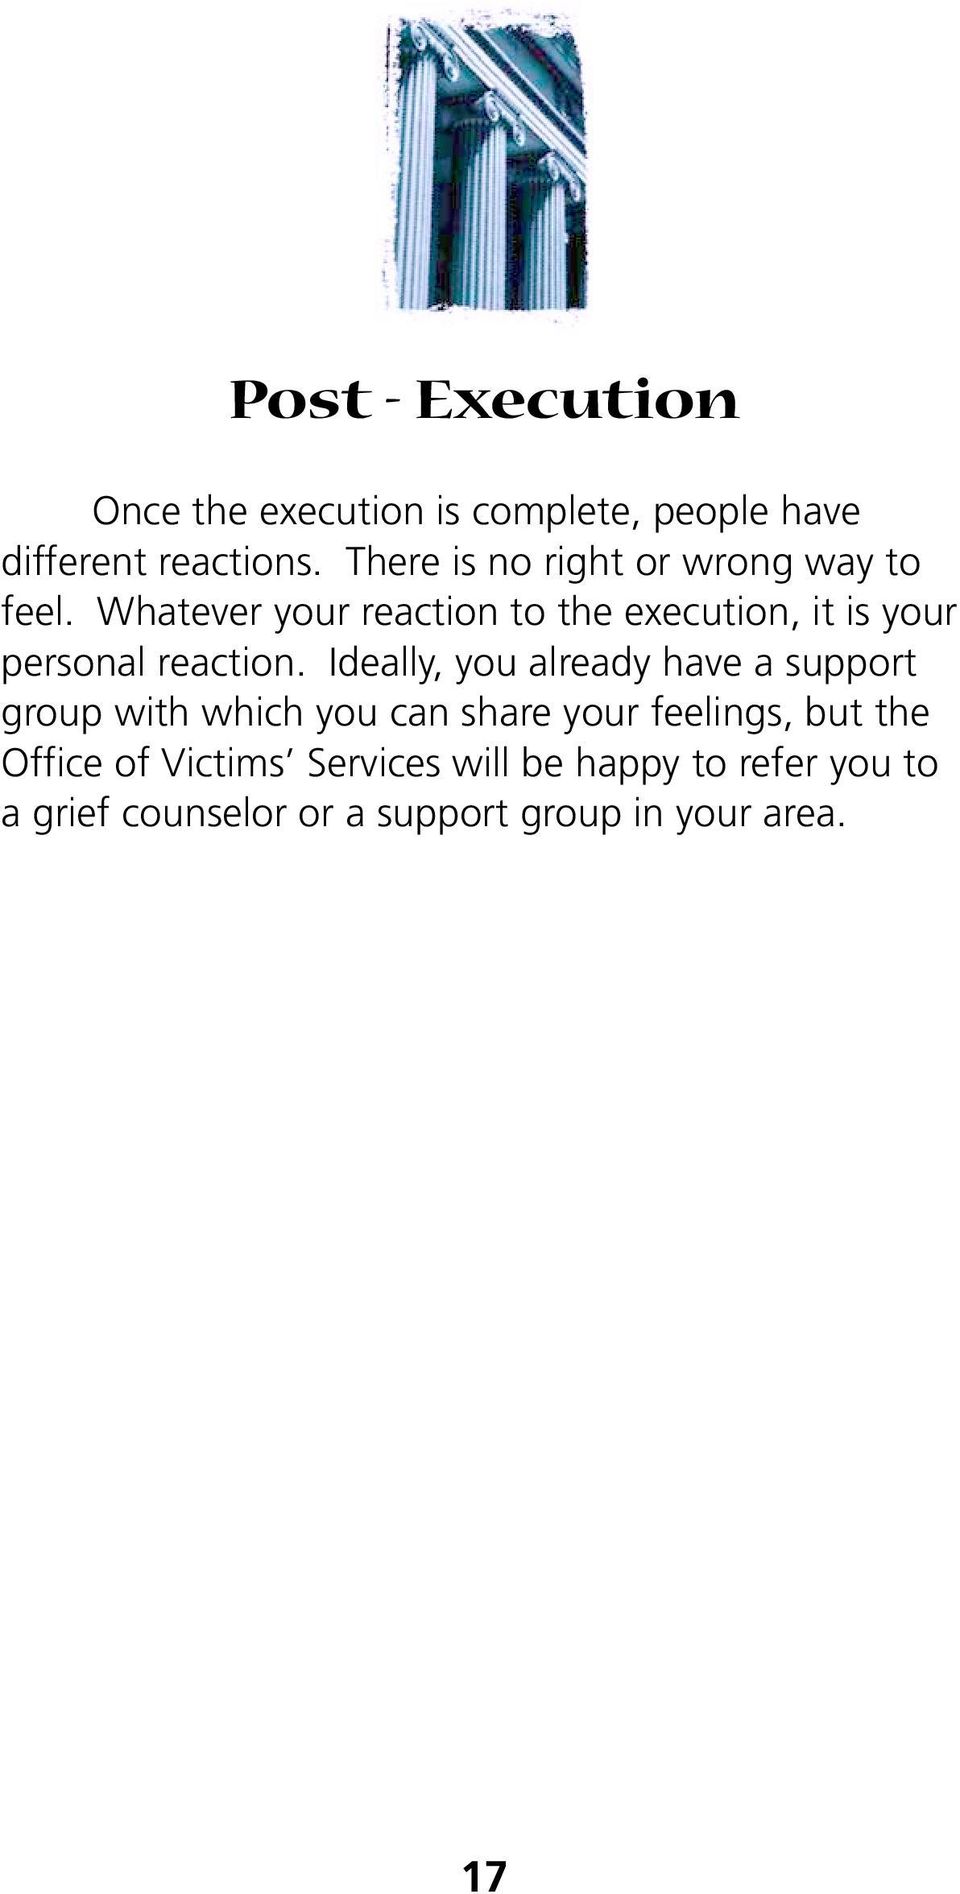 Whatever your reaction to the execution, it is your personal reaction.